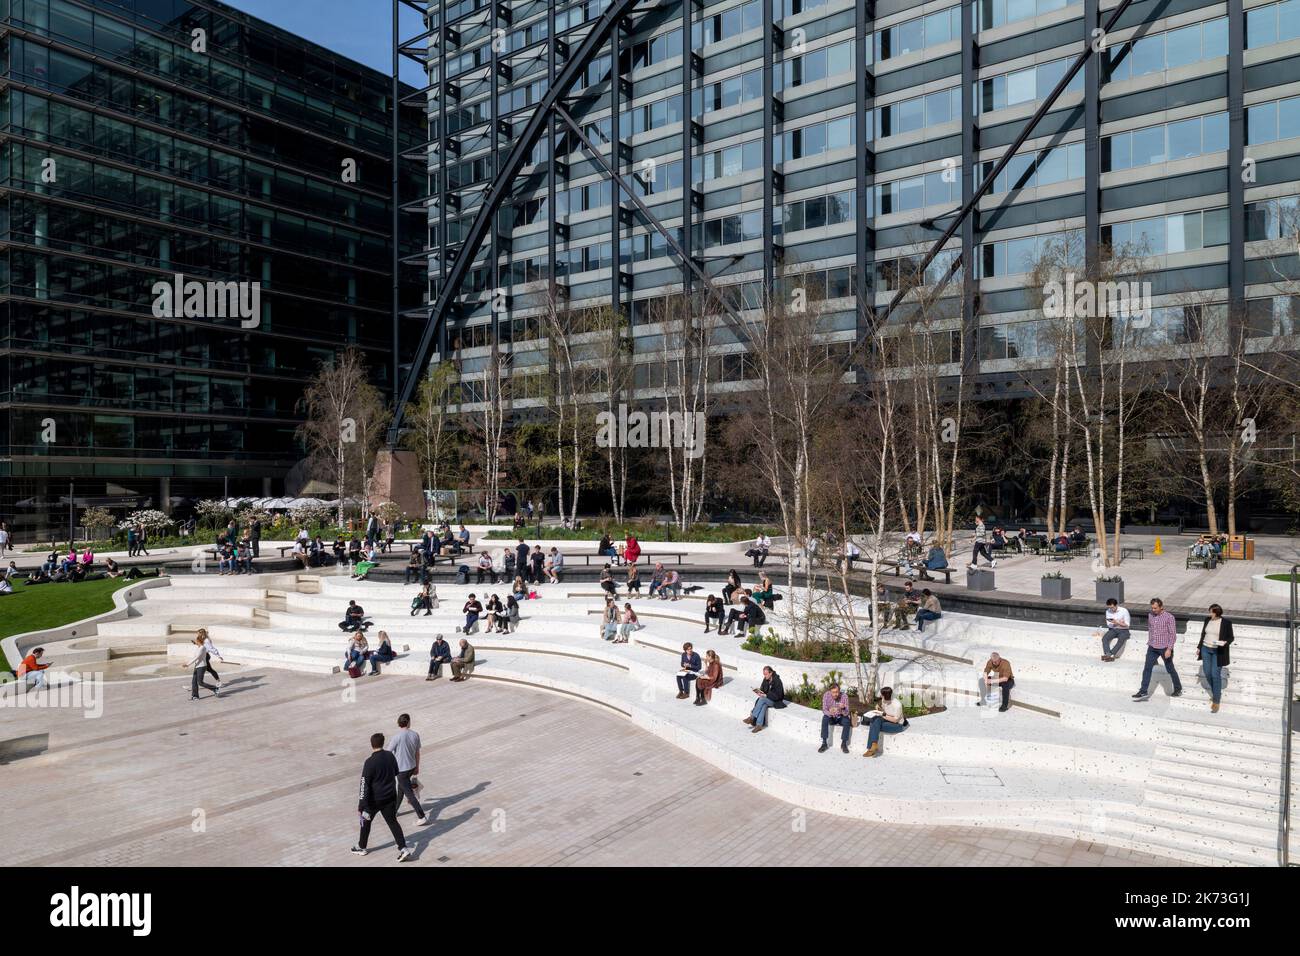 Wide view across square with informal seating. Exchange Square, London, United Kingdom. Architect: DSDHA, 2022. Stock Photo